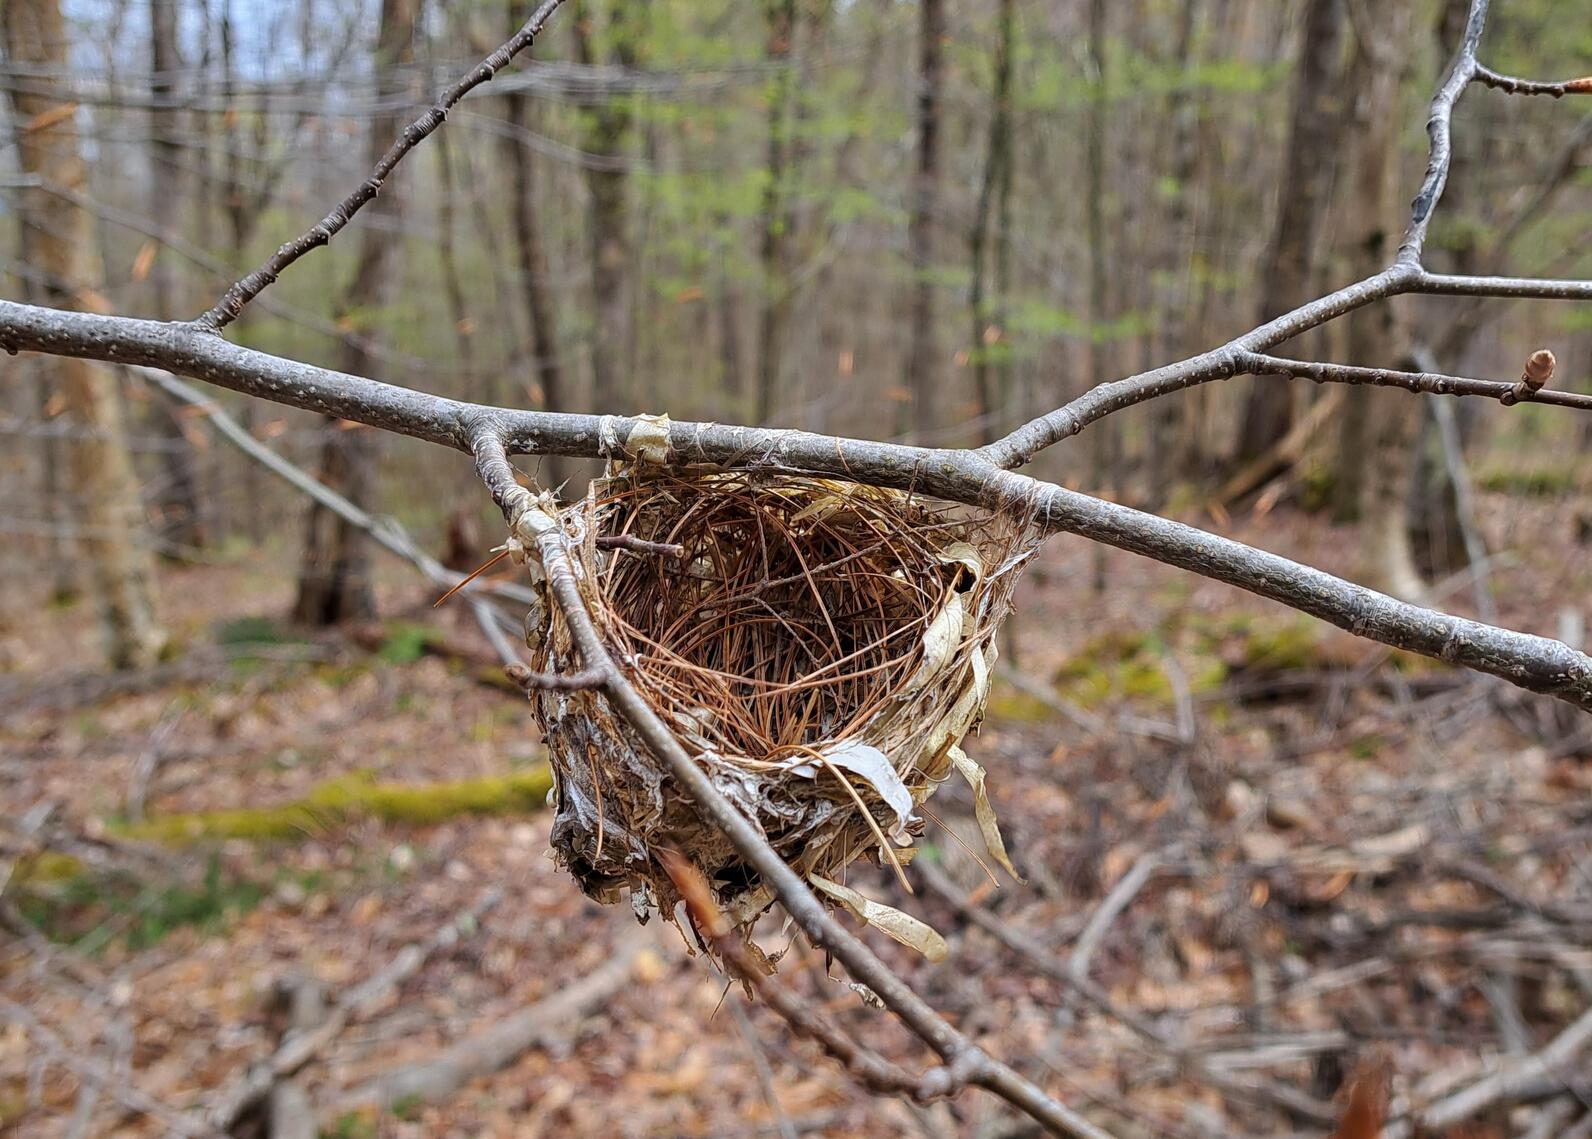 A nest made of pine needles and grasses hangs in the elbow of a tree branch Y. Suspected to be a Red-eyed Vireo nest. 